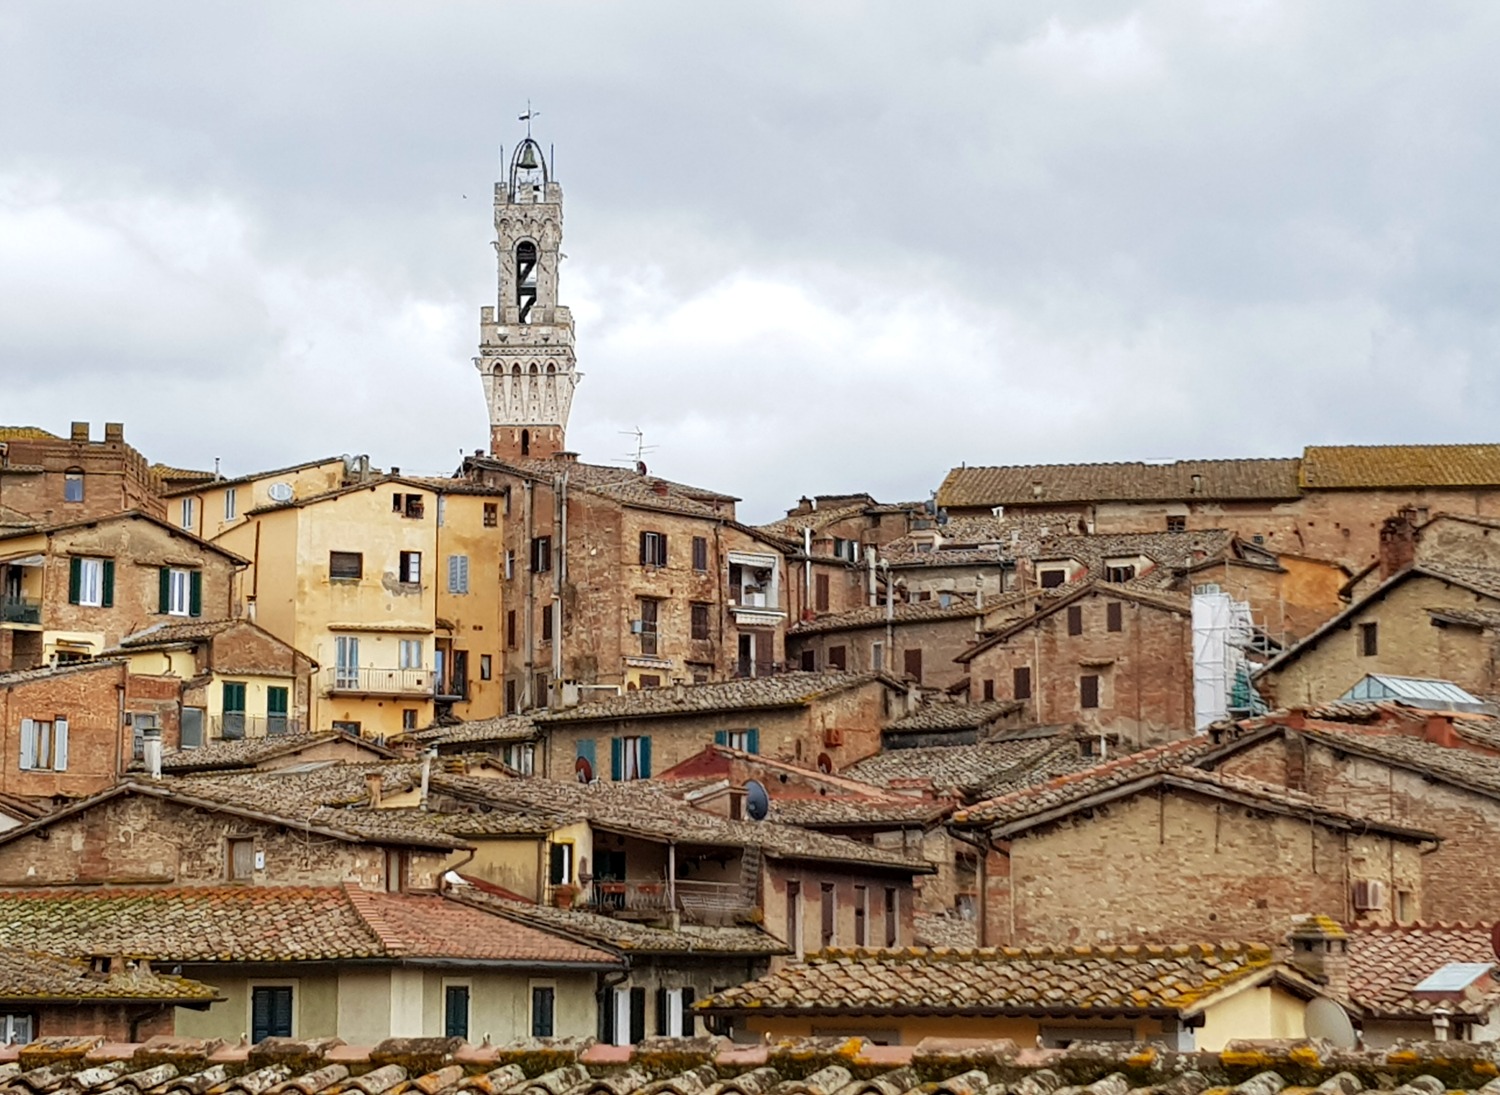 A view over the rooftops of Siena to one of the city's towers - exploring Siena with kids, our tour discovering art, history and animals